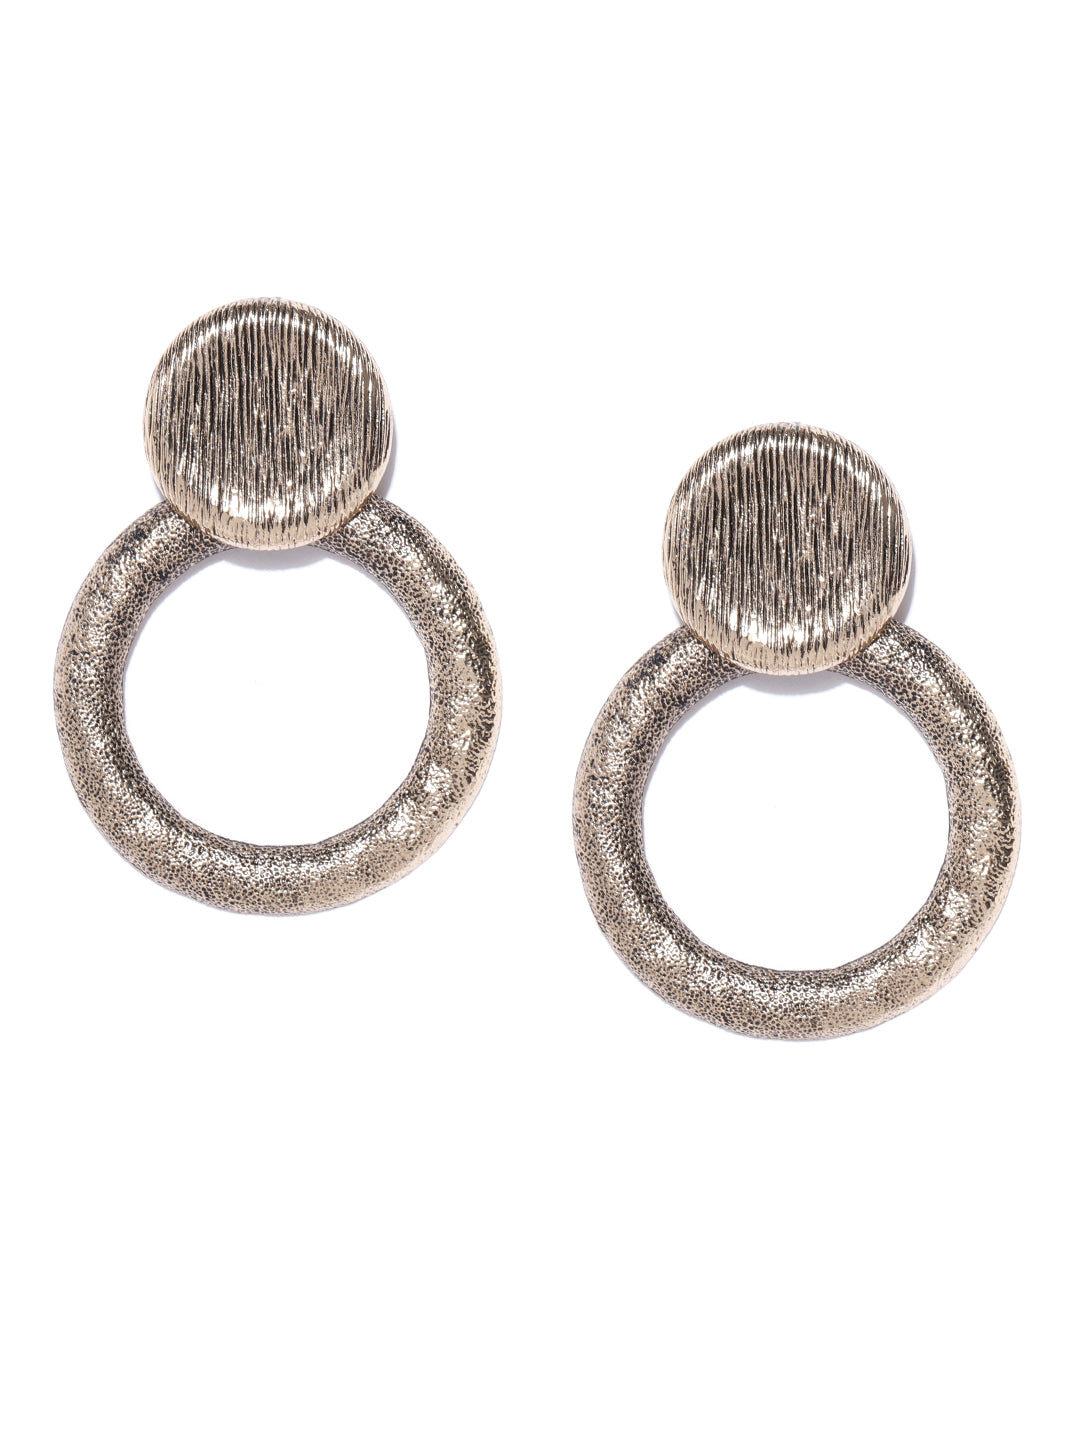 Gold-Plated Antique Circular Drop Earrings